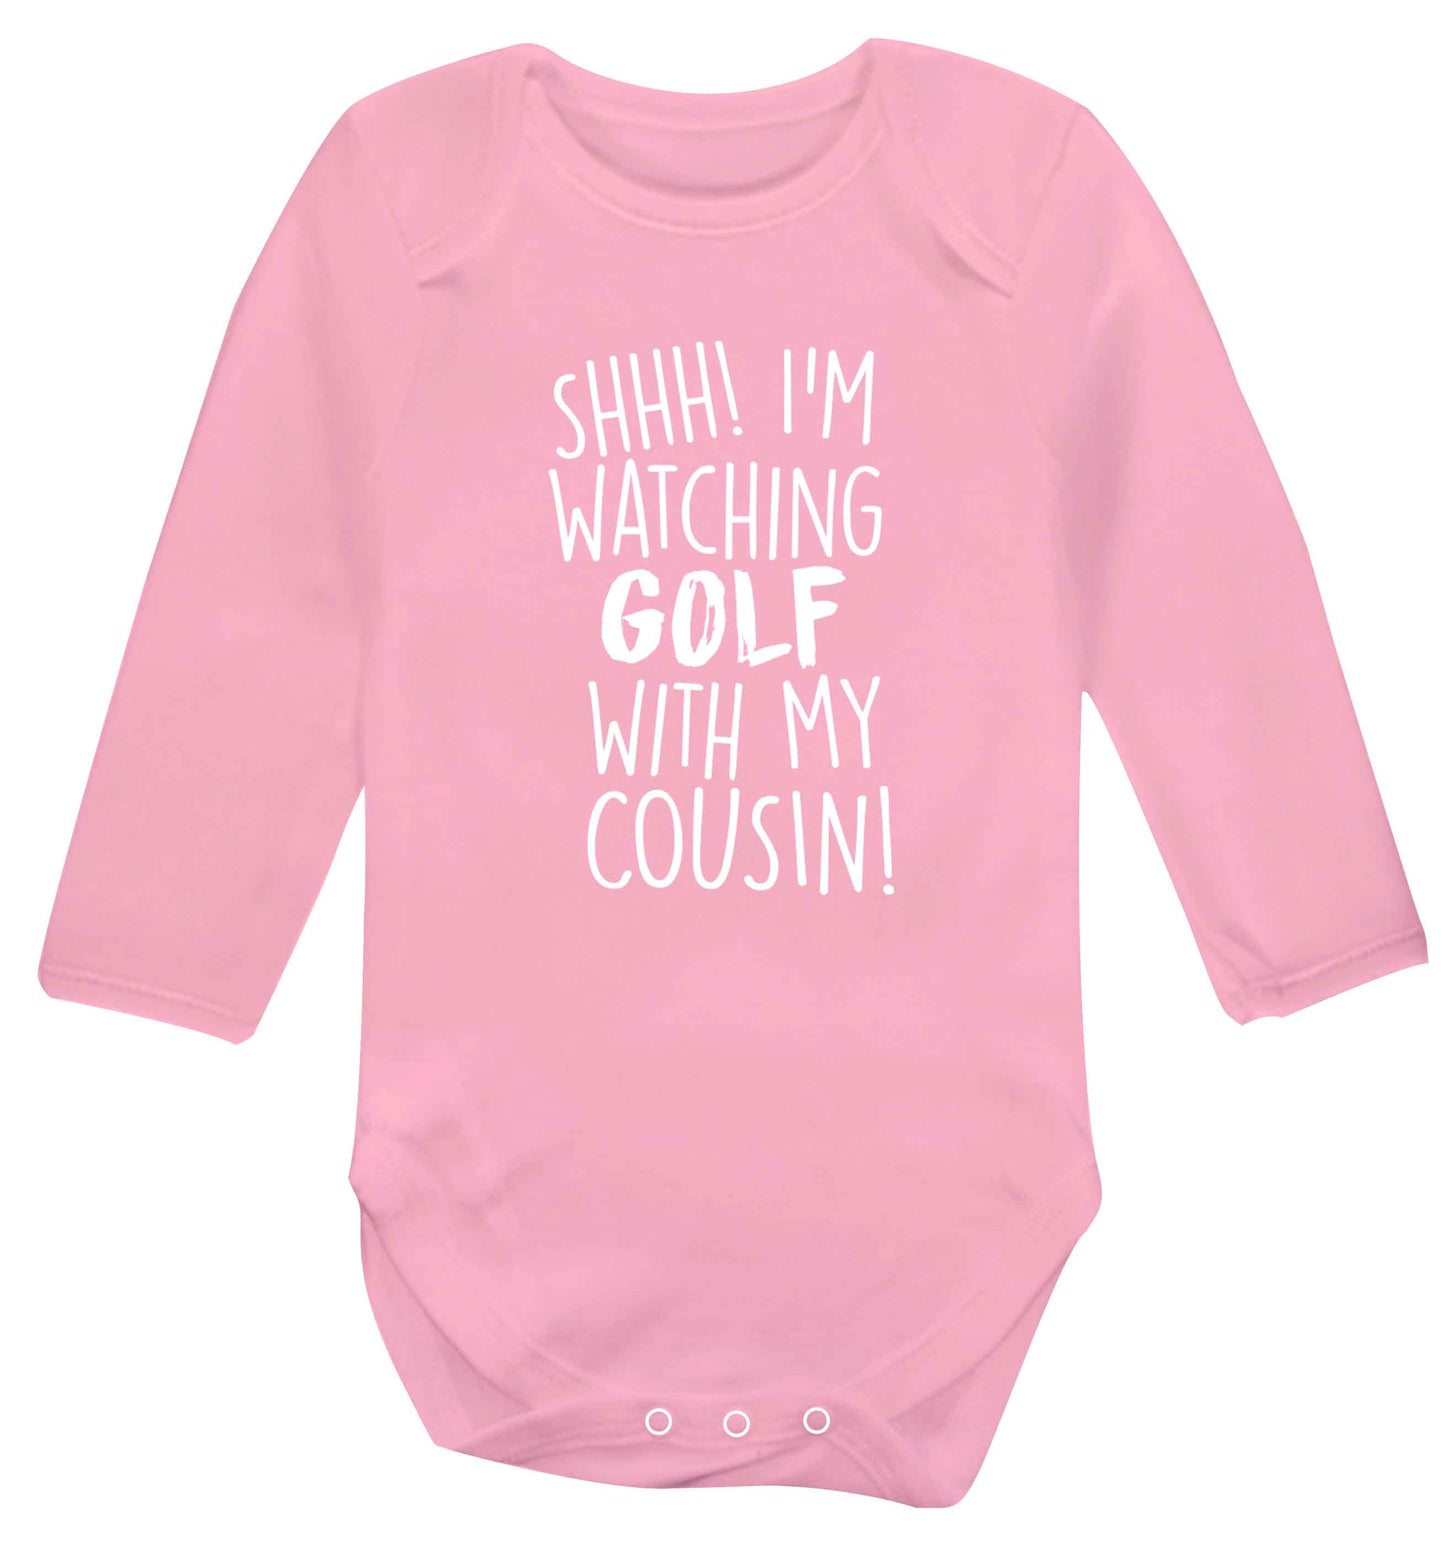 Shh I'm watching golf with my cousin Baby Vest long sleeved pale pink 6-12 months